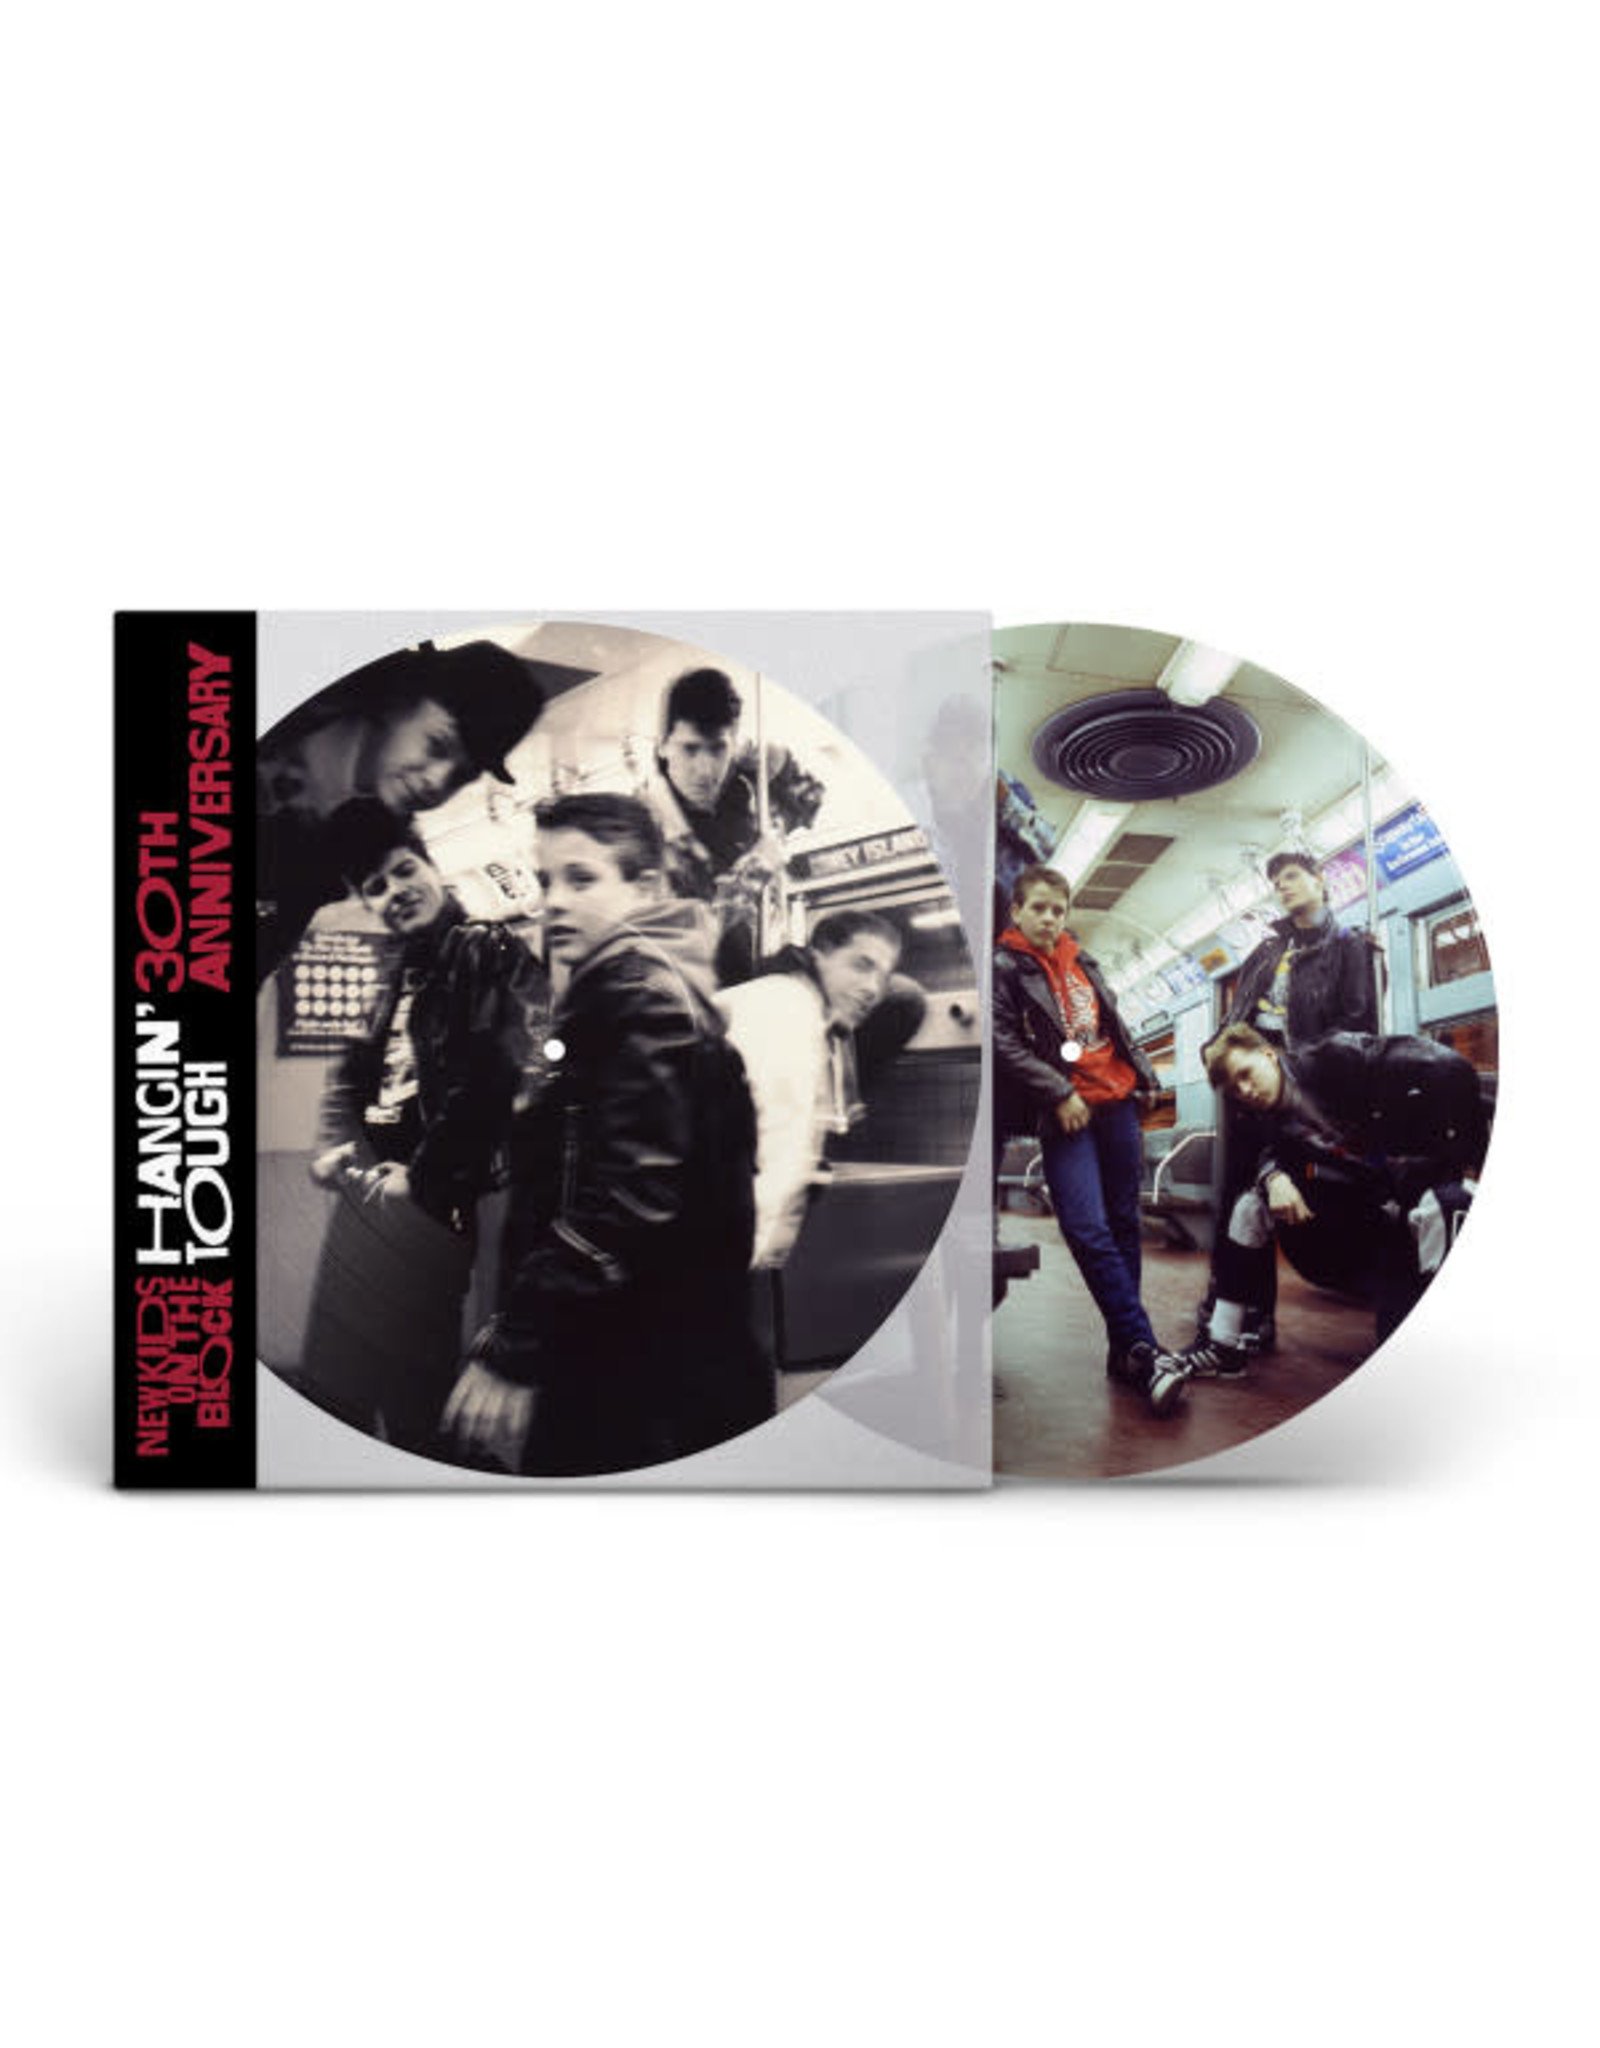 New Kids On The Block - Hangin' Tough (30th Anniversary Picture Disc)